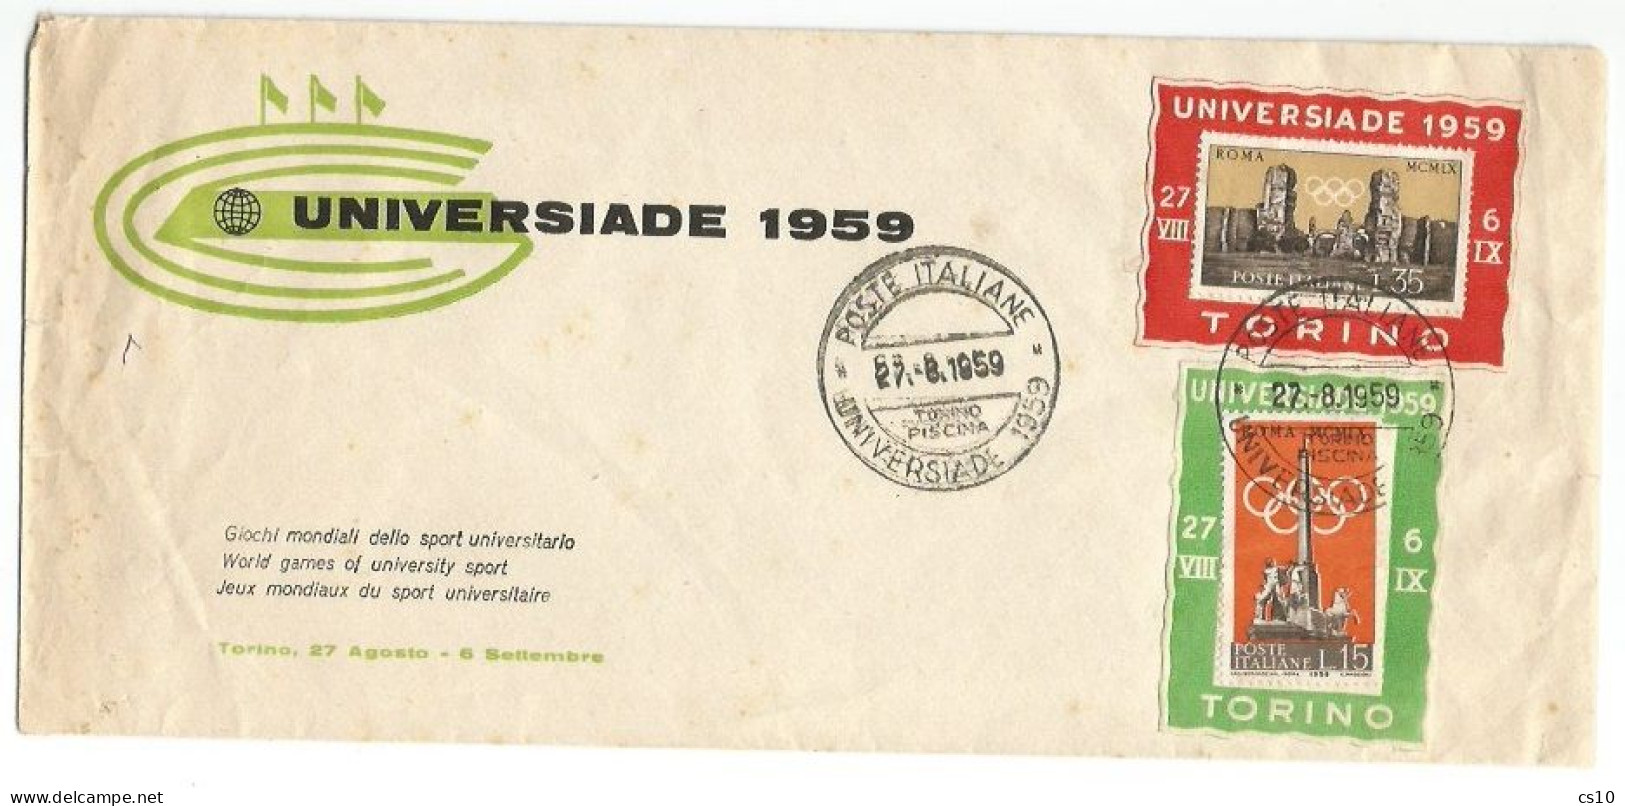 Universiadi 1959 University Games Torino Italy Swimming Nuoto Piscina 27aug59 Official Cover + PPC With Official Labels - Natation